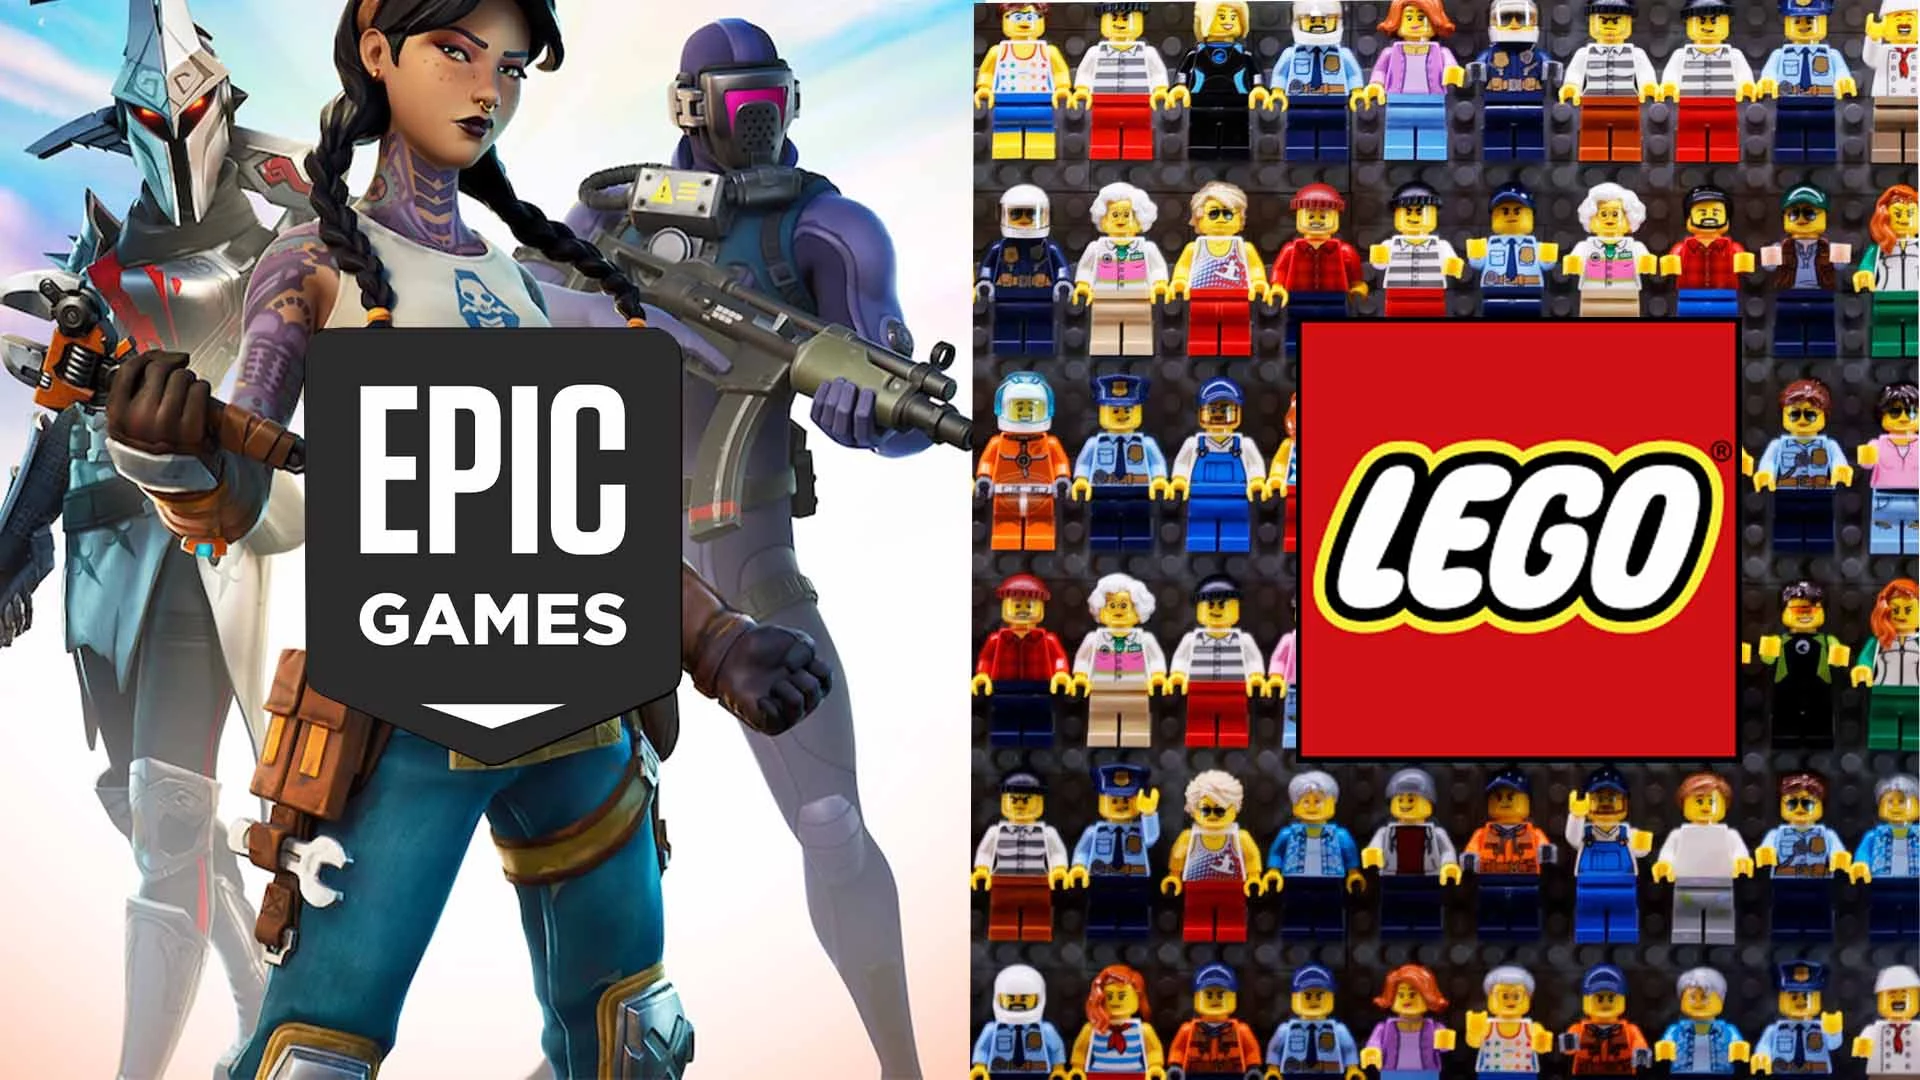 Epic Games and Lego have partnered